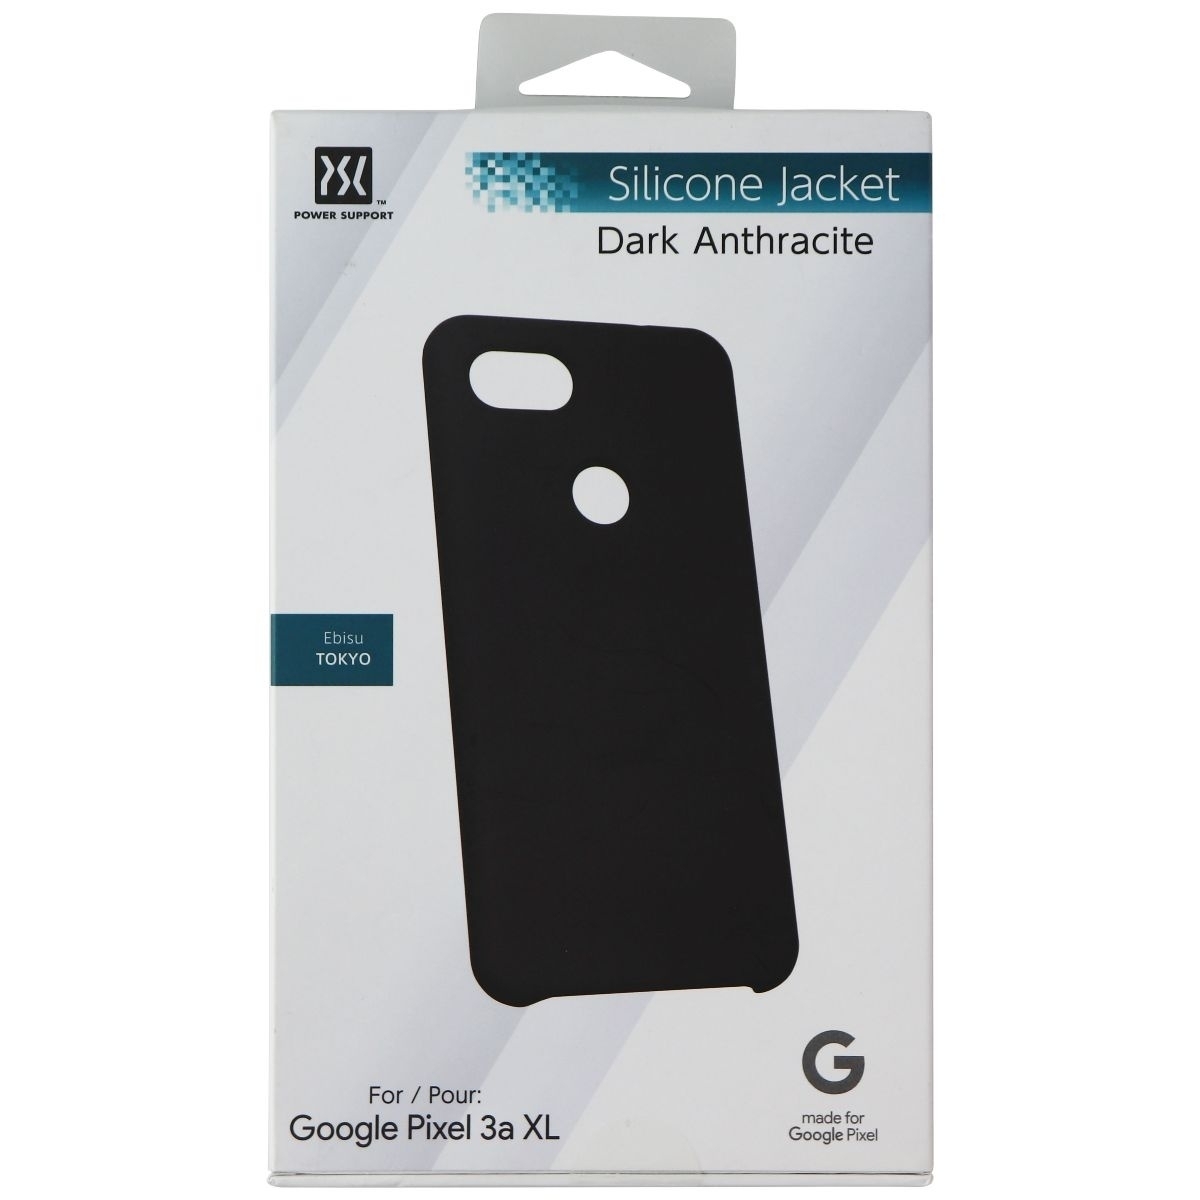 Power Support Silicone Jacket Case For Pixel 3a XL - Dark Anthracite